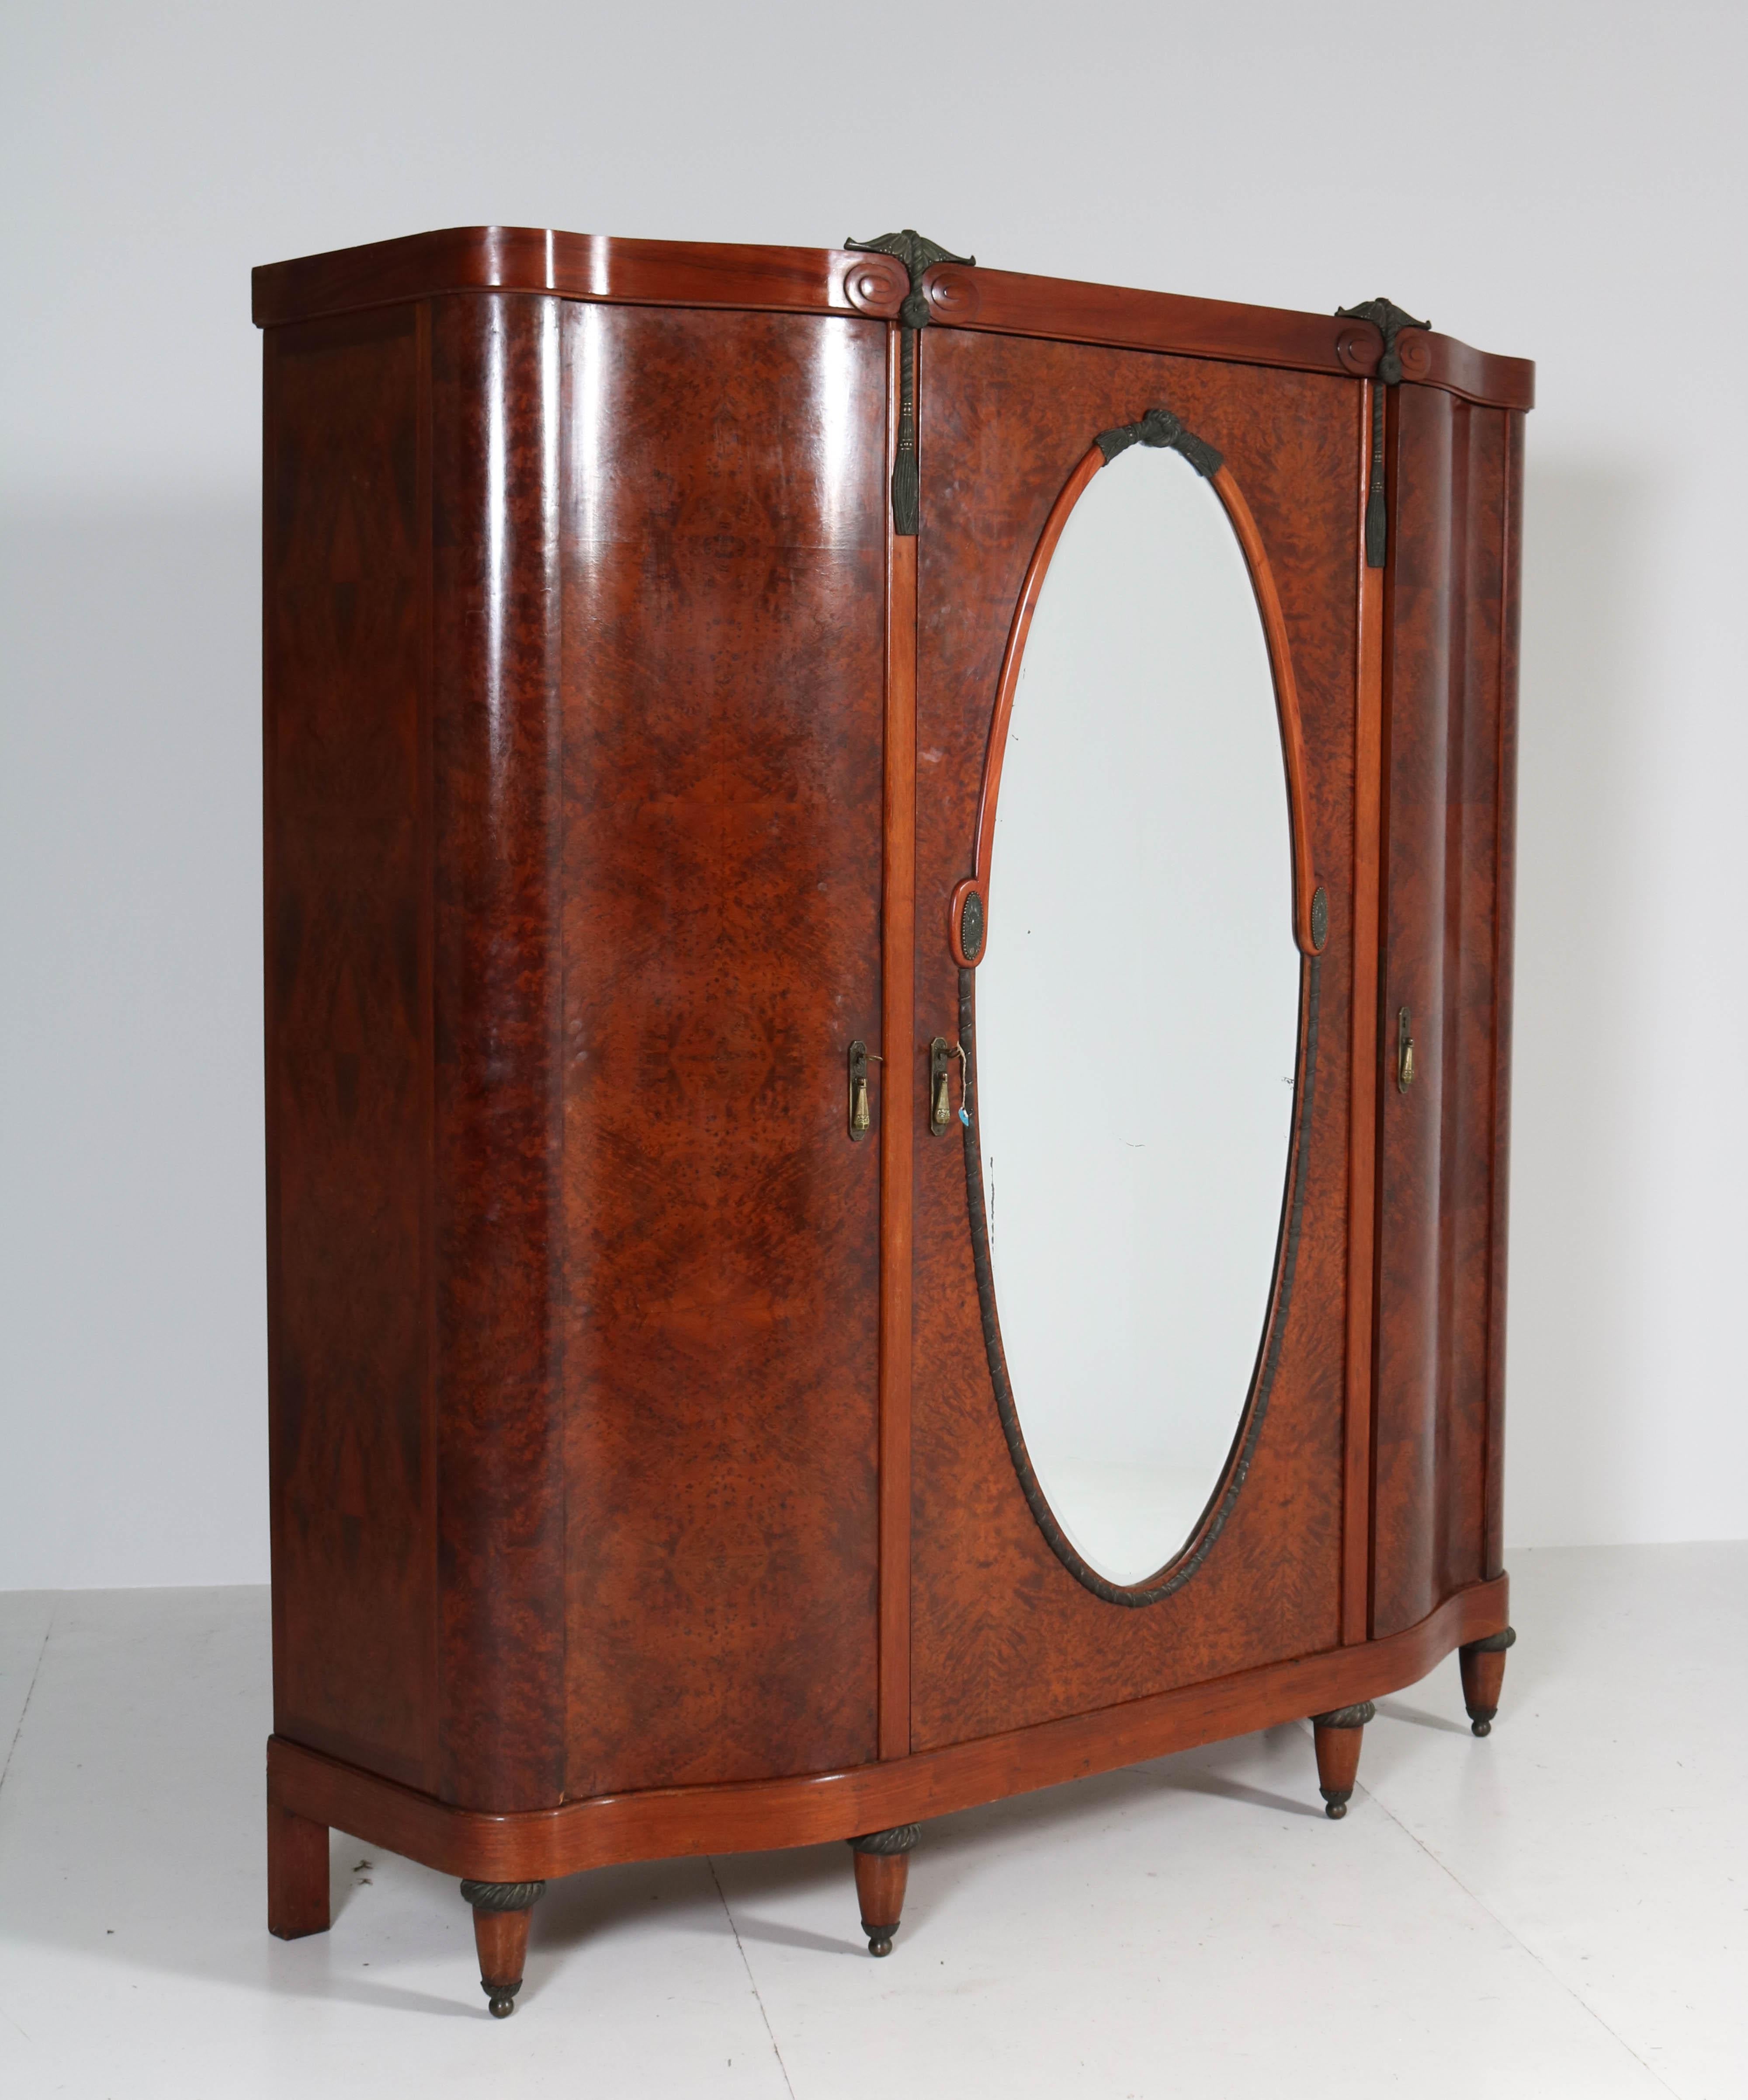 Stunning and rare Art Deco wardrobe or armoire.
Striking French design from the thirties.
Thuya burl with original bronze handles and ornaments.
Behind the door with the original beveled mirror is a brass bar for hanging clothes.
Eight wooden